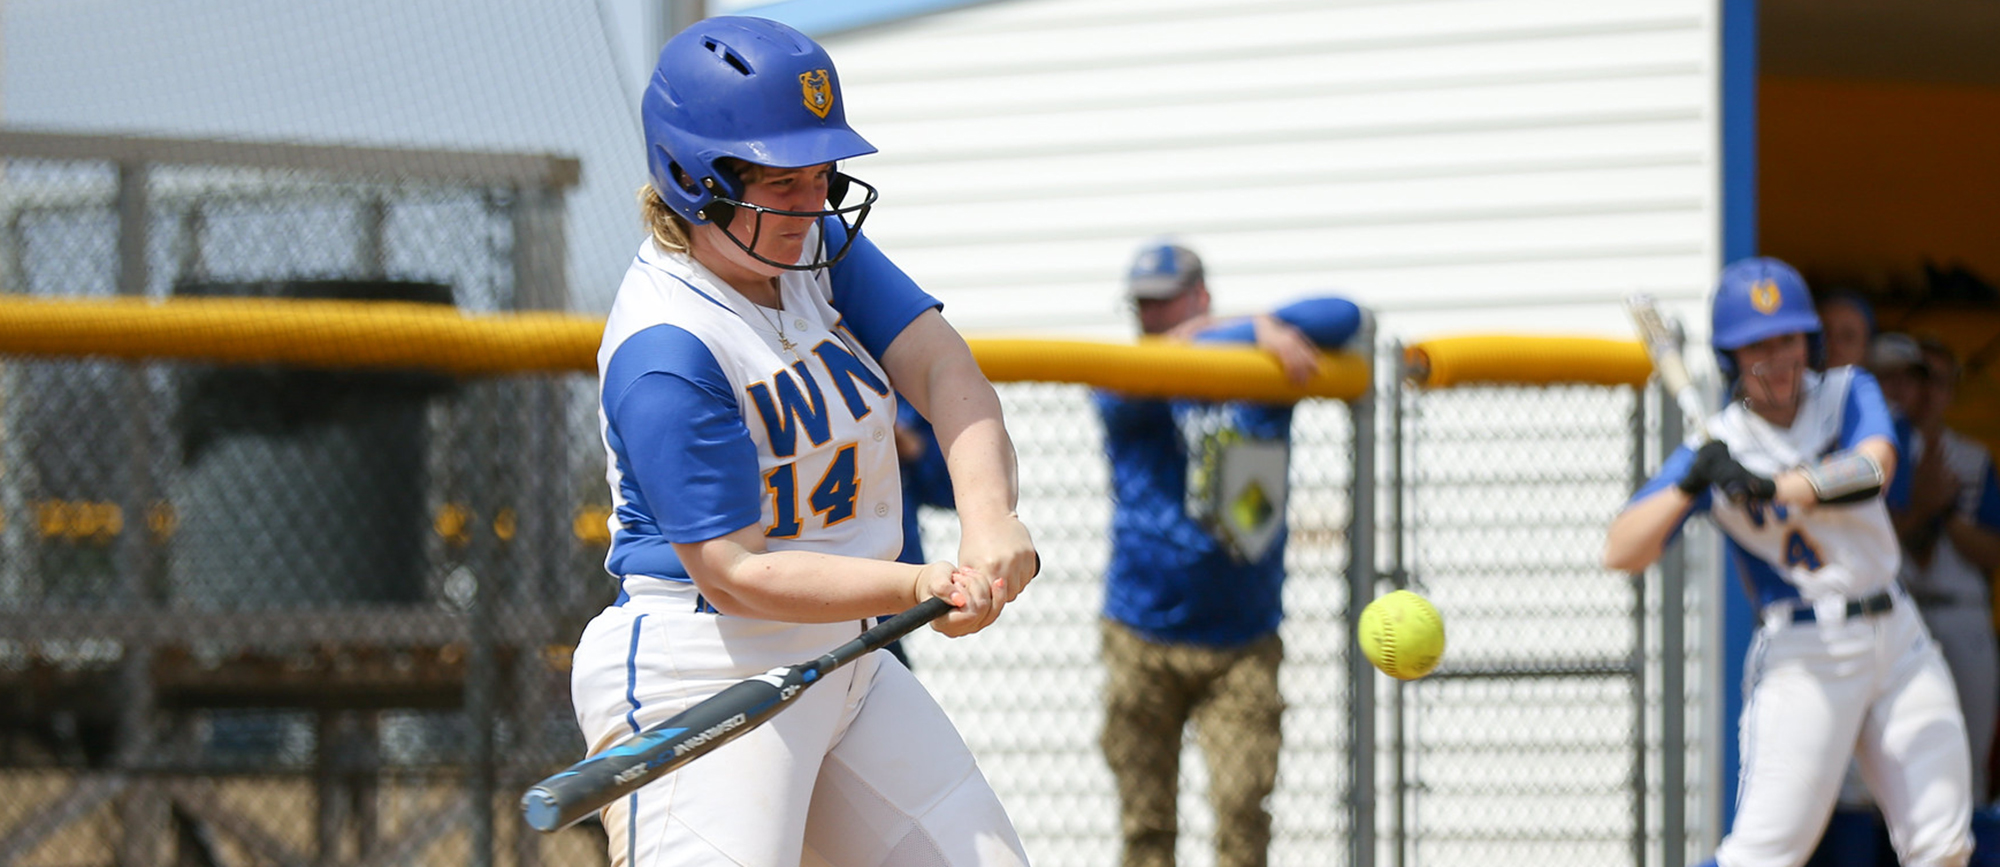 Dina DiBlasio hit her team-leading fourth home run of the season on Sunday as the Golden Bears split two games with Curry. (Photo by Chris Marion)